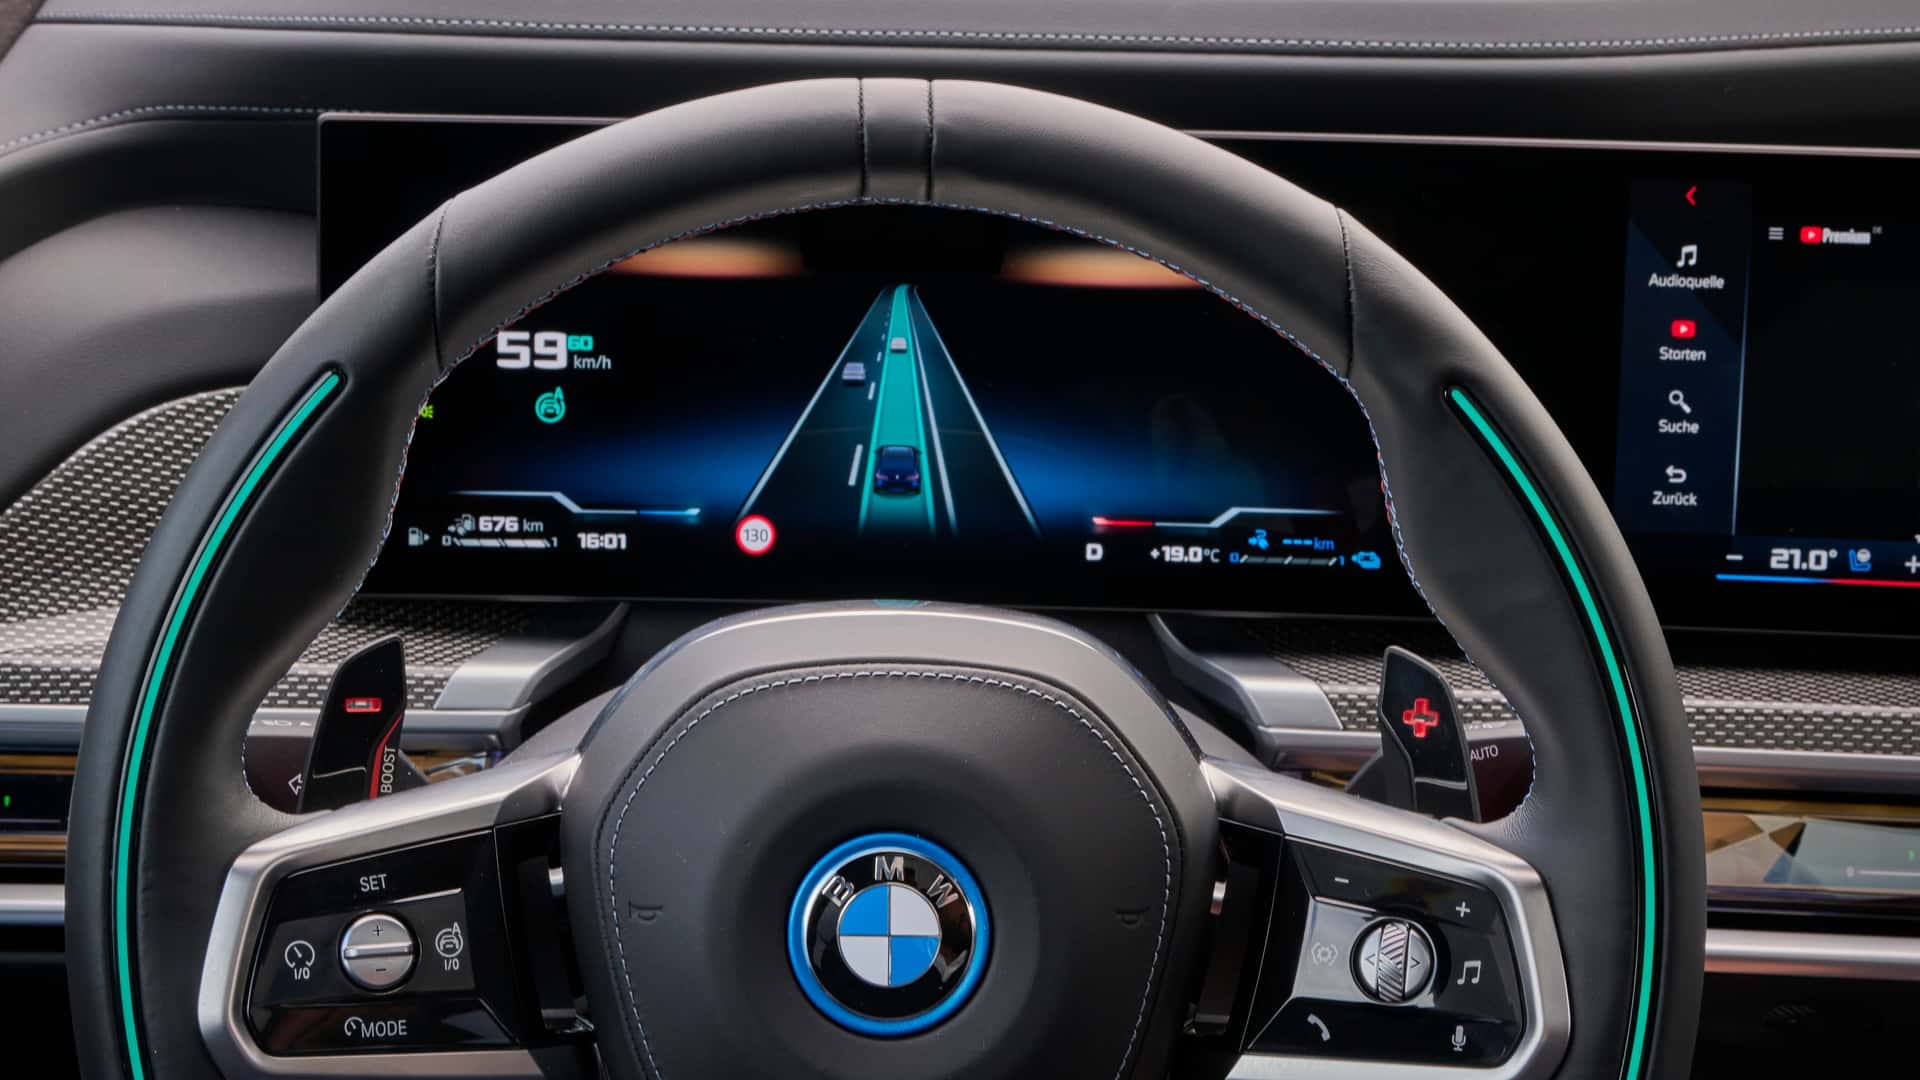 bmw’s $6,400 level 3 automated driving system goes live next year in germany